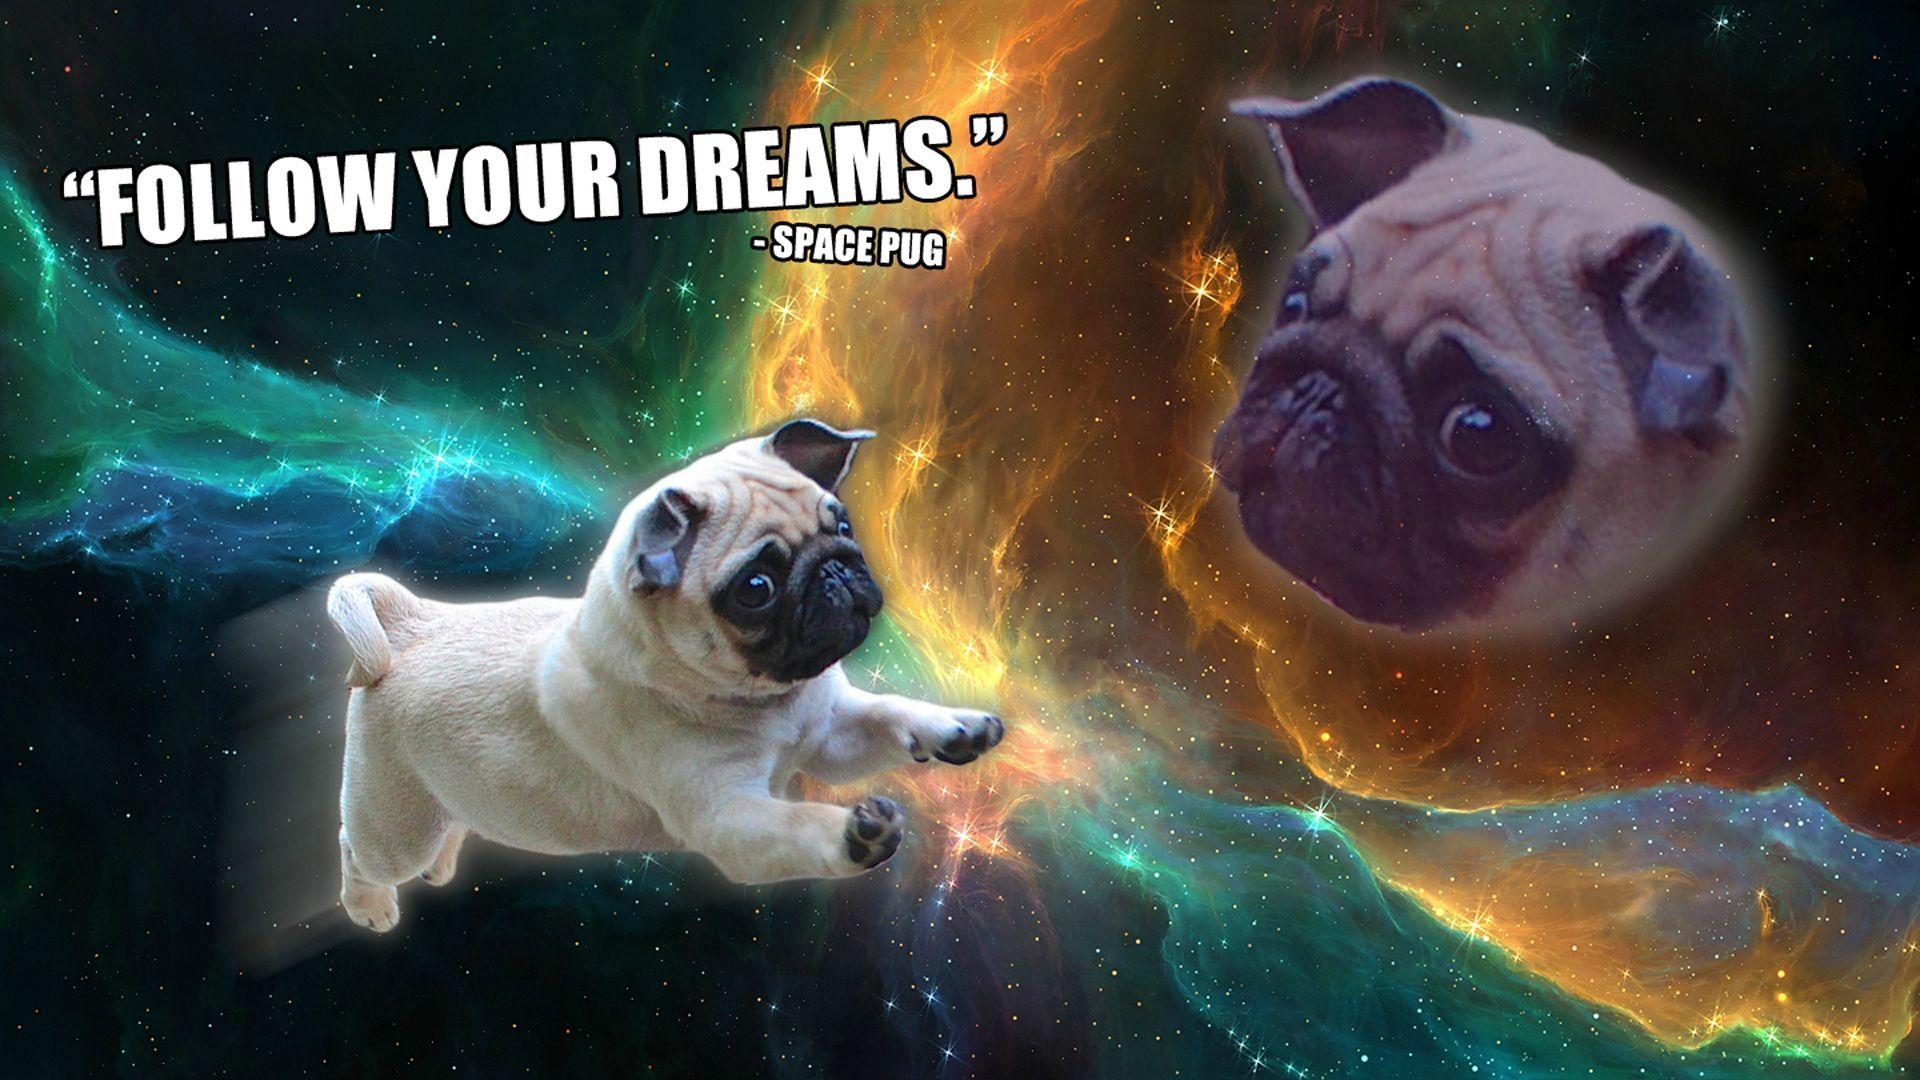 Download Pug wallpapers for mobile phone free Pug HD pictures